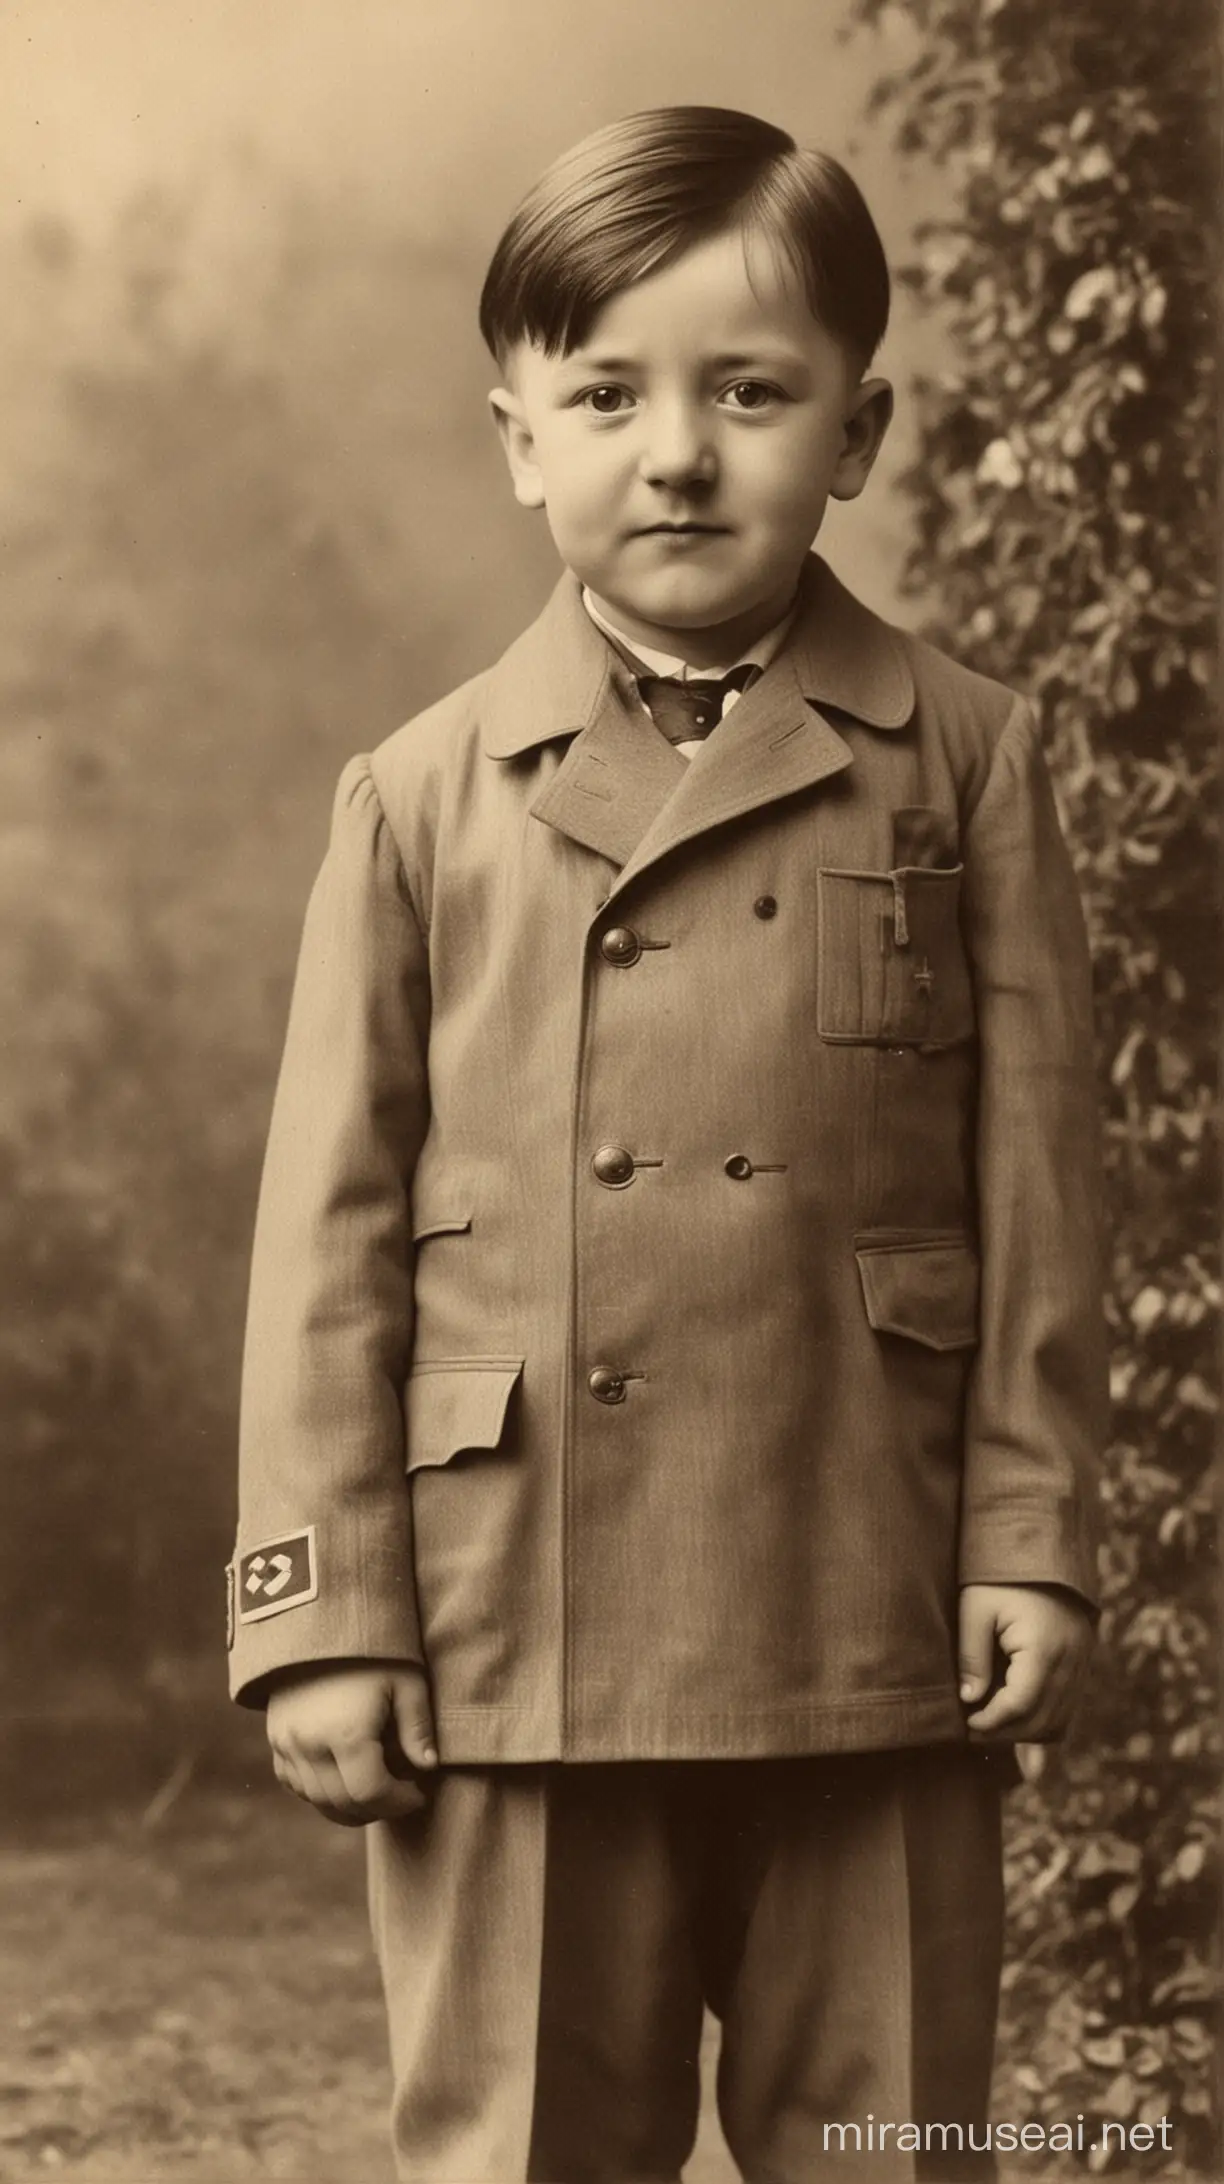 Young Adolf Hitler in His Childhood